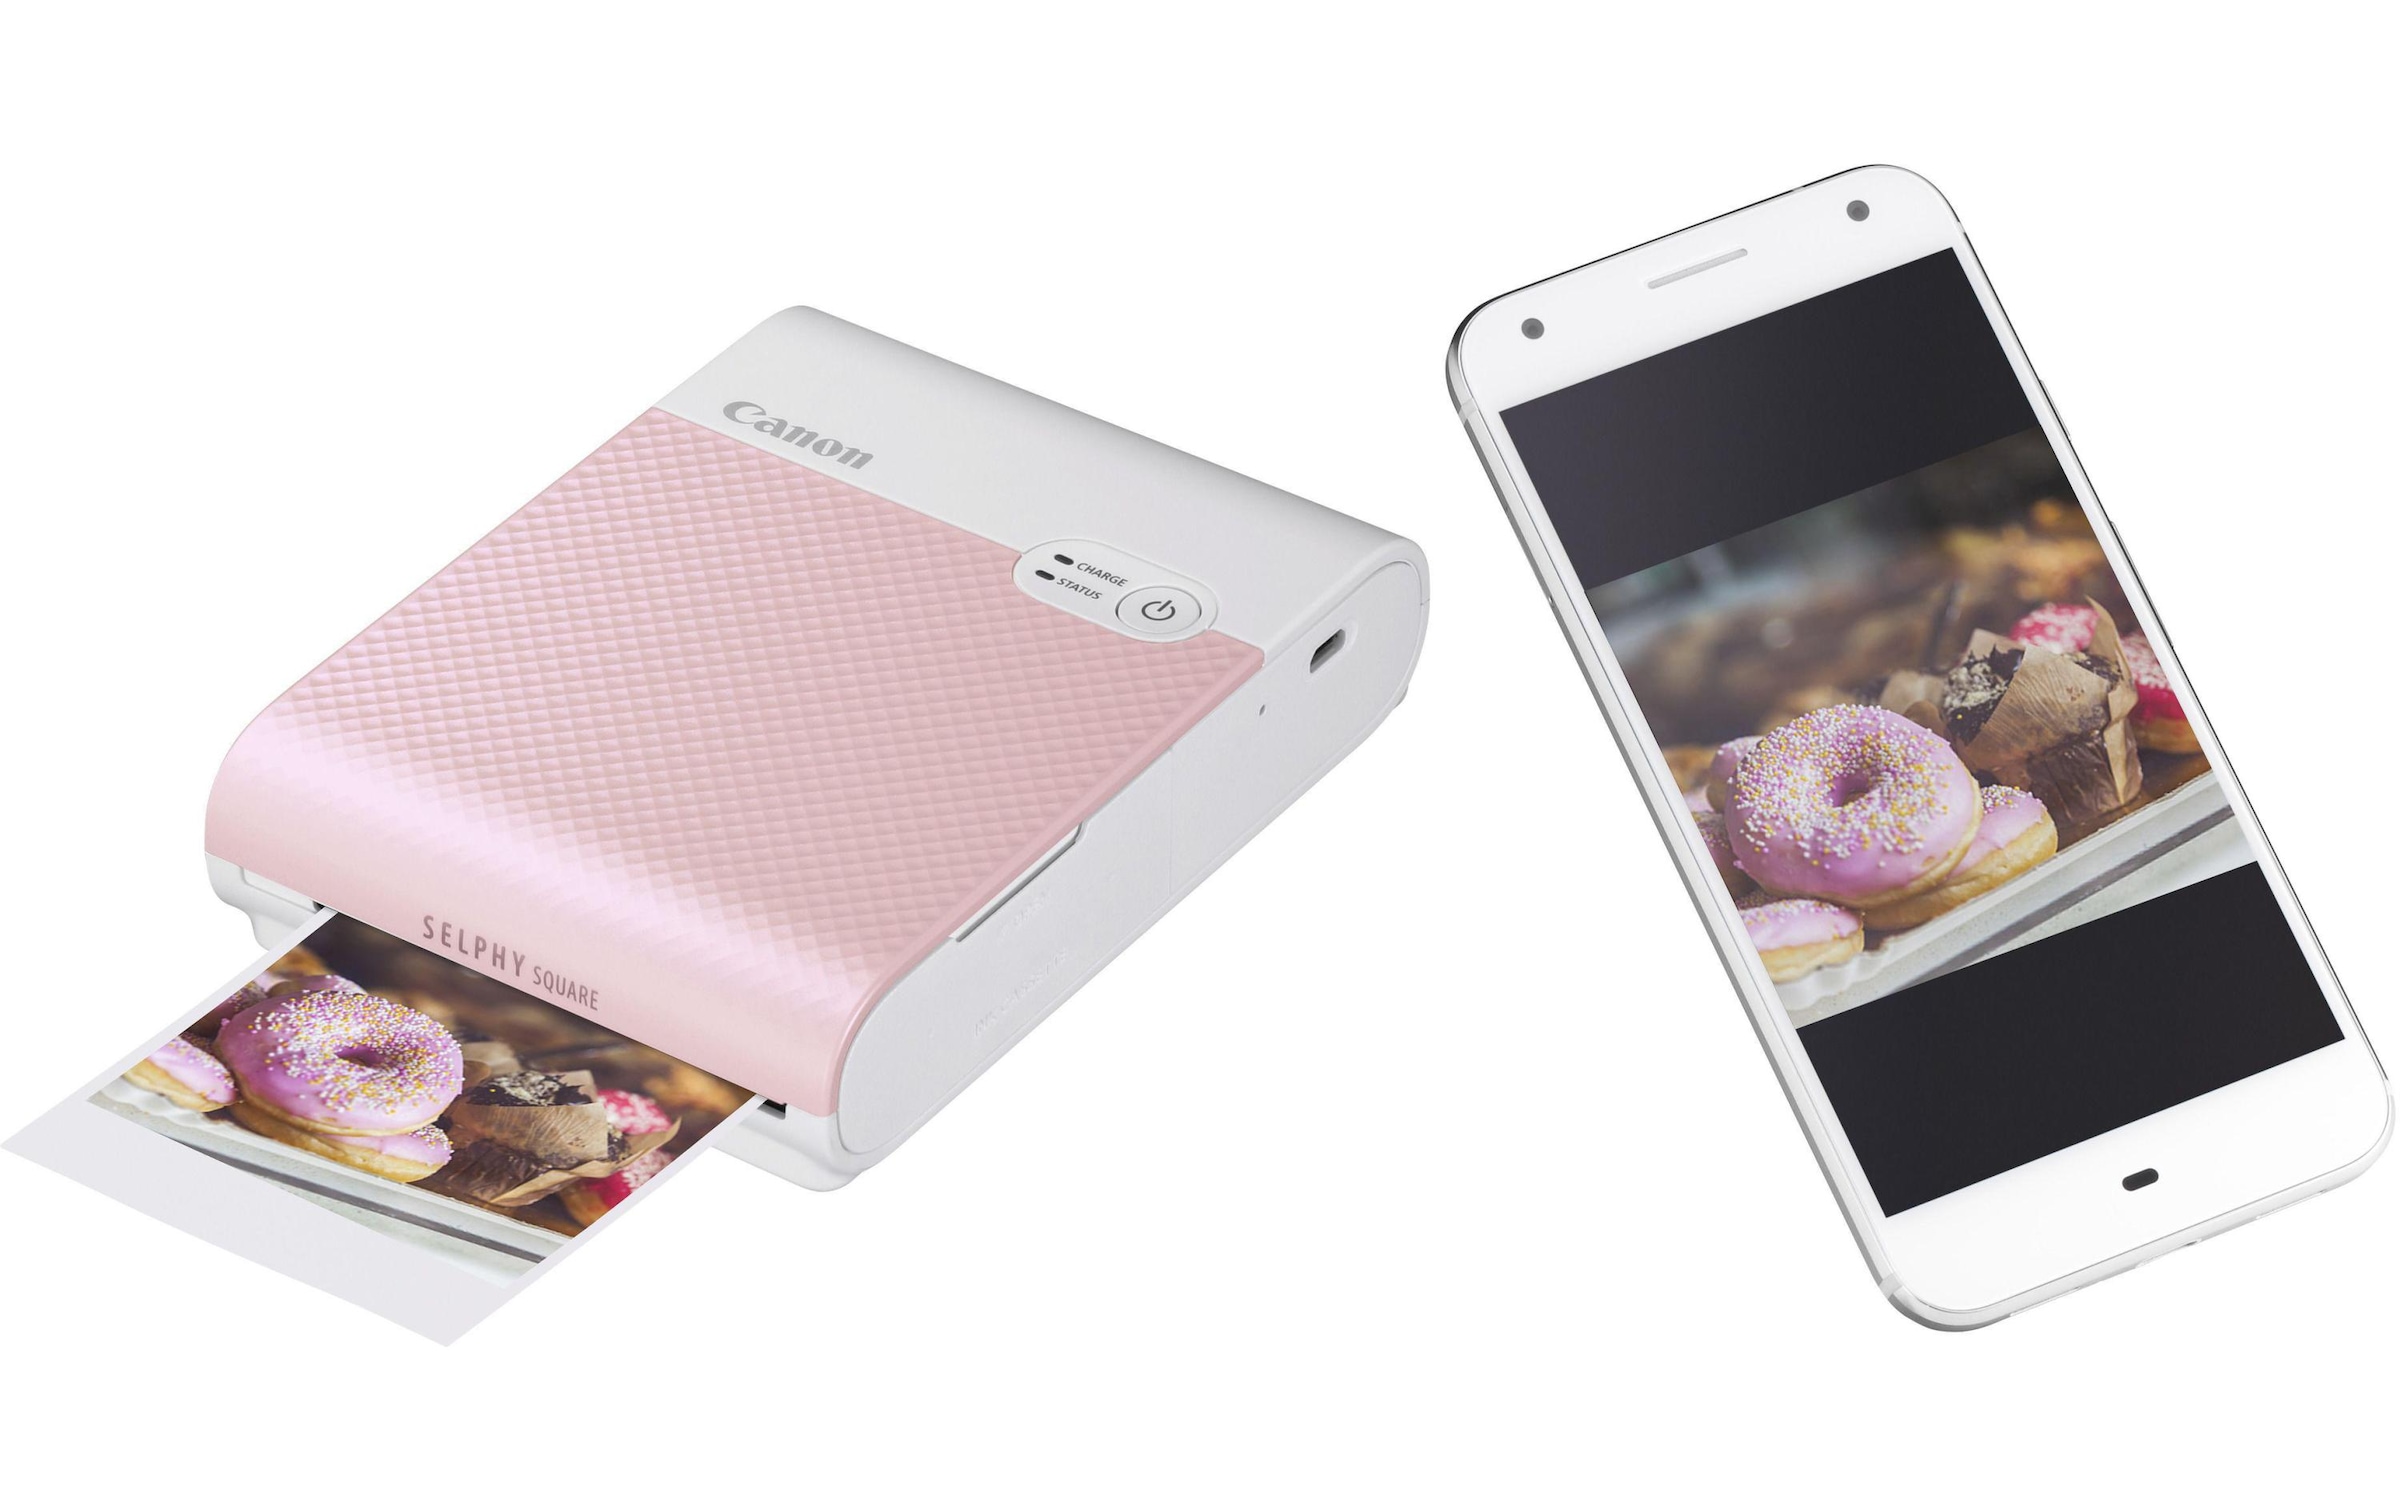 Canon Fotodrucker »SELPHY Square QX10 Pink«